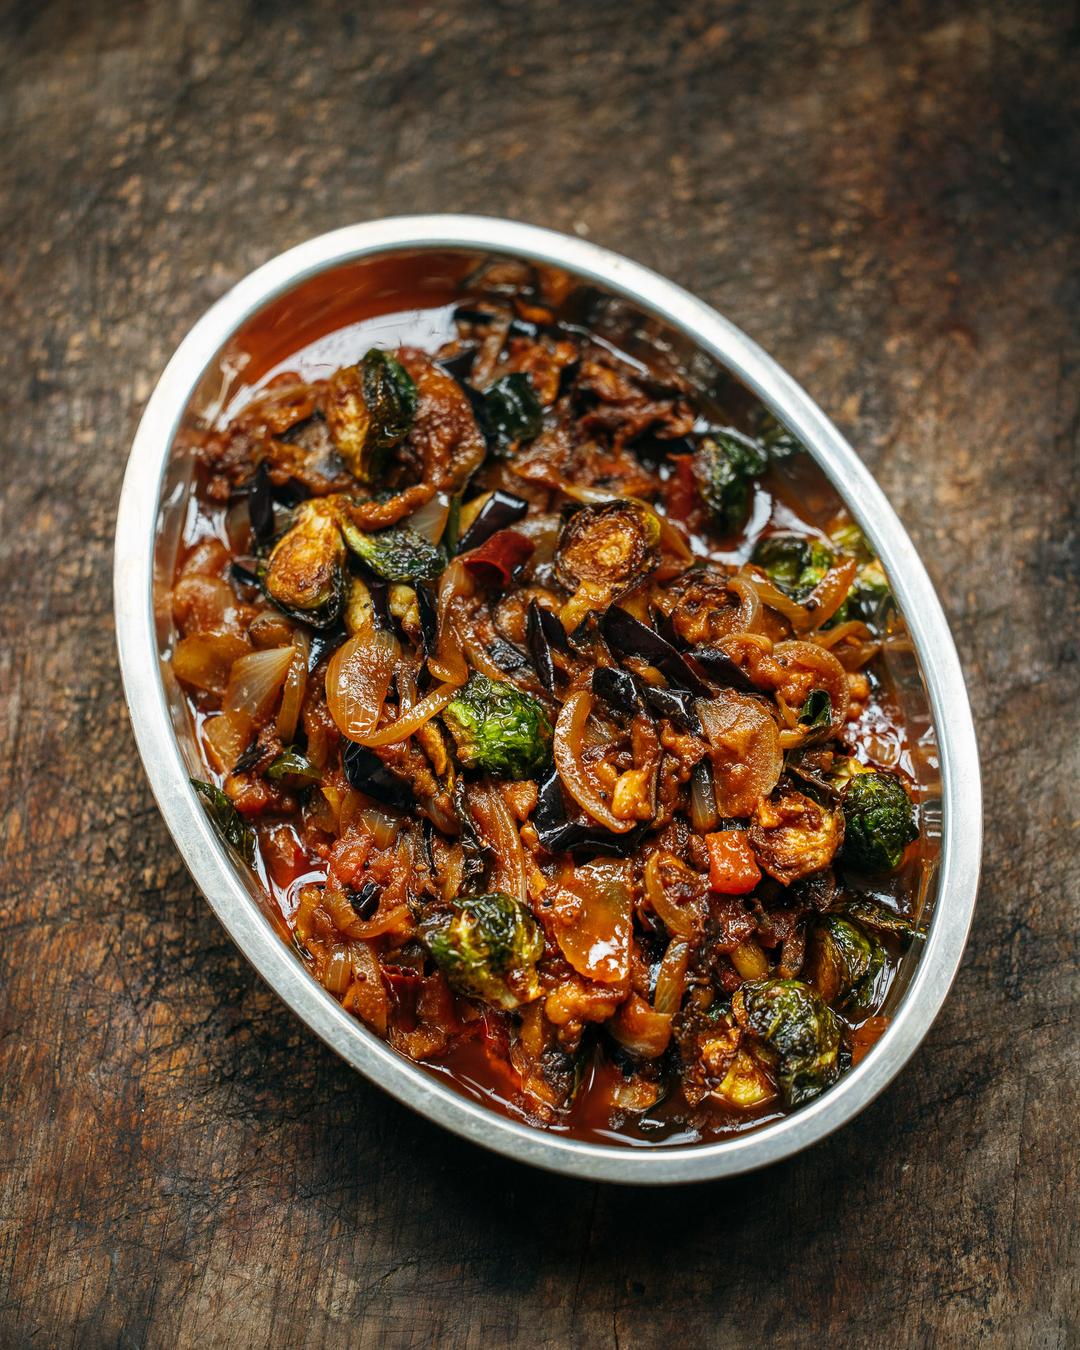 Eggplant and brussels sprouts kadai